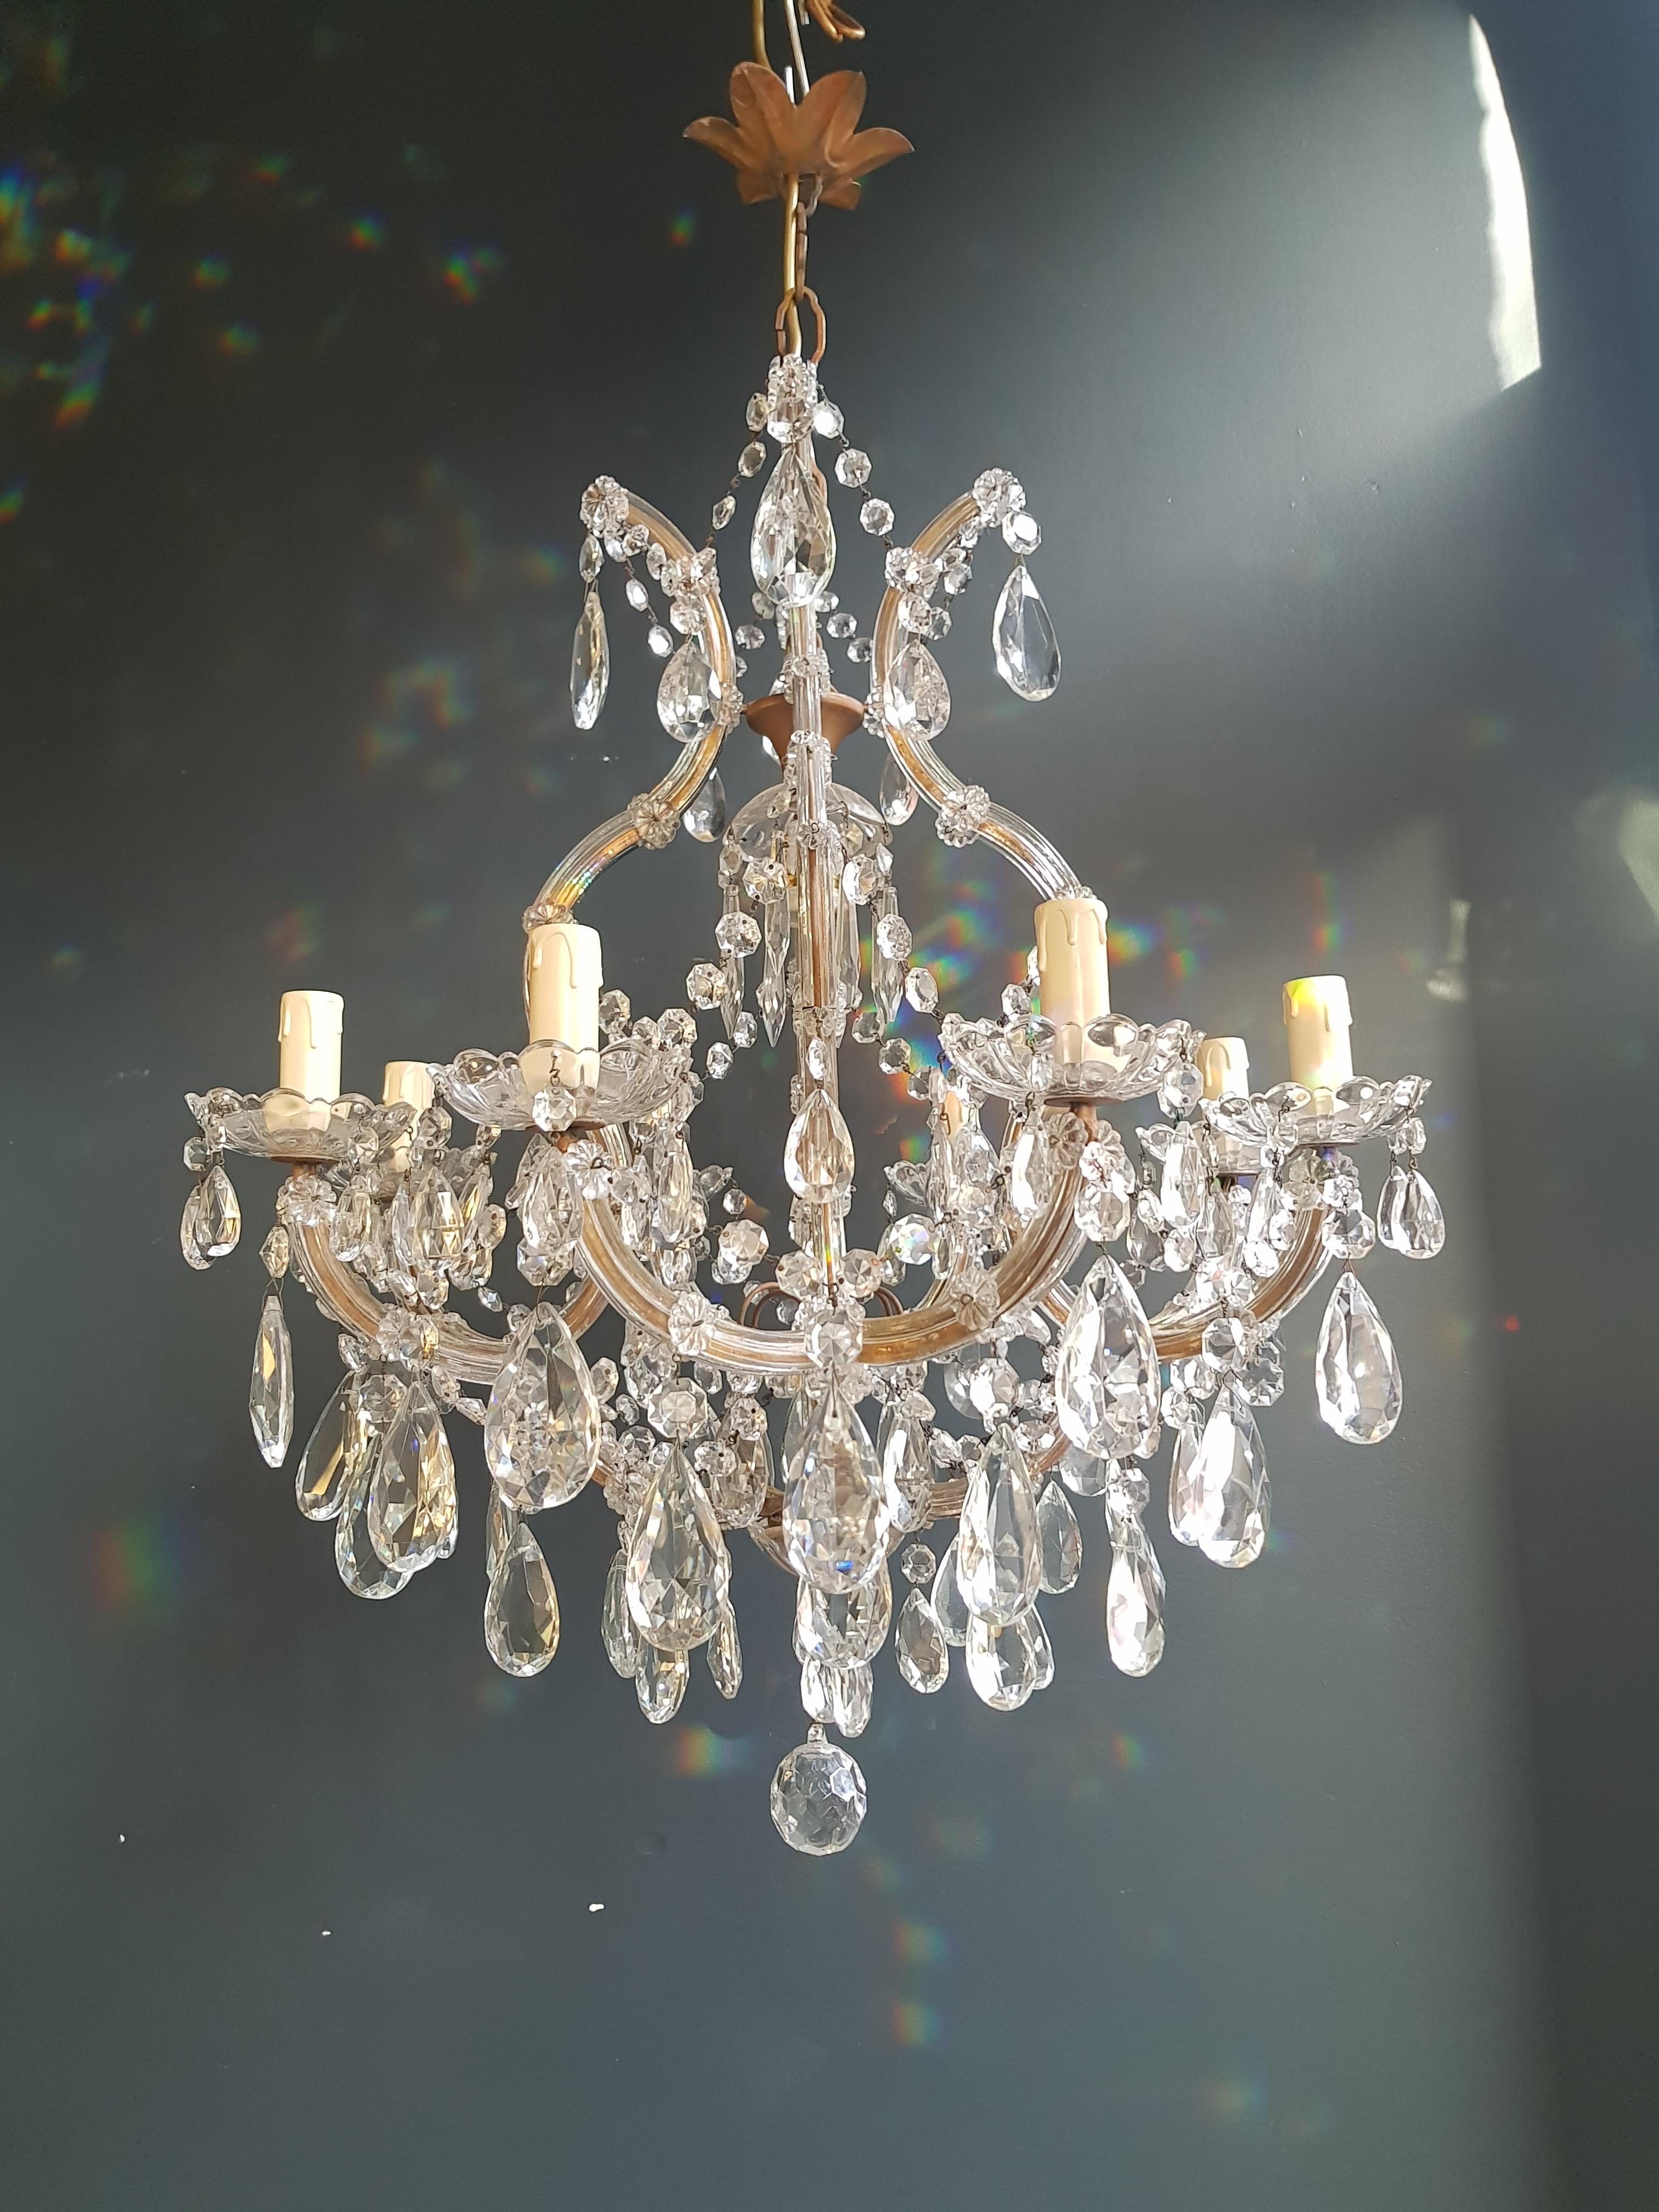 The frame is fully dressed all-over with glass. Cut crystal drops of different dimensions and shapes are hanging all-over the octagonal button chains, all around the chandelier.

Measures: Total height 150 cm, height without chain 70 cm, diameter